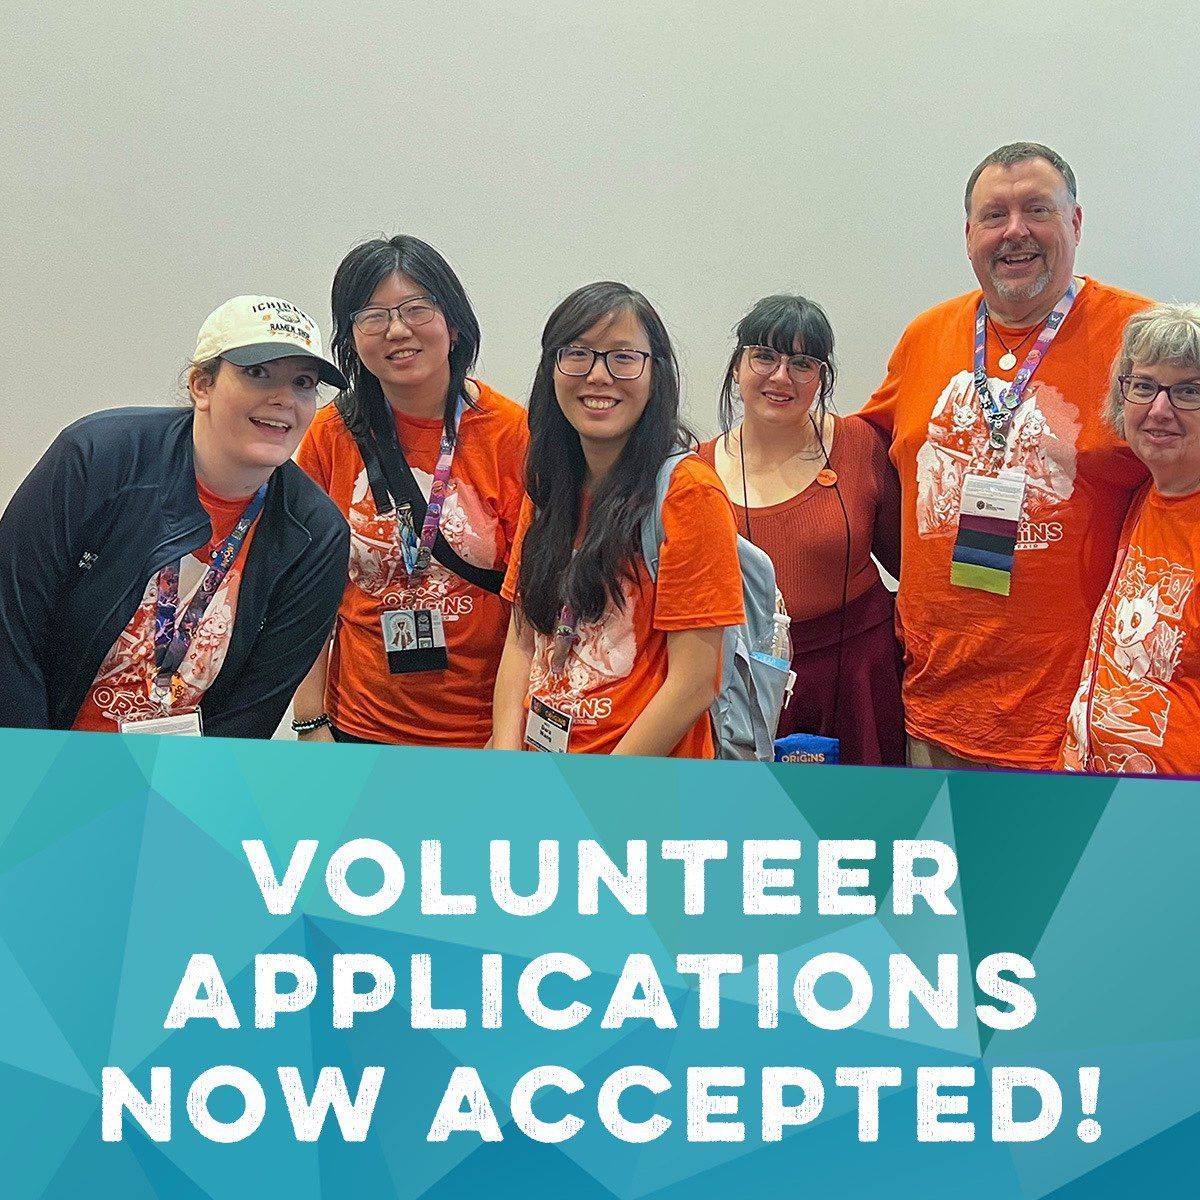 Remember volunteer applications are still open! Help us make #OriginsGameFair the best ever and be rewarded for it! Learn more: buff.ly/3zUI8N0